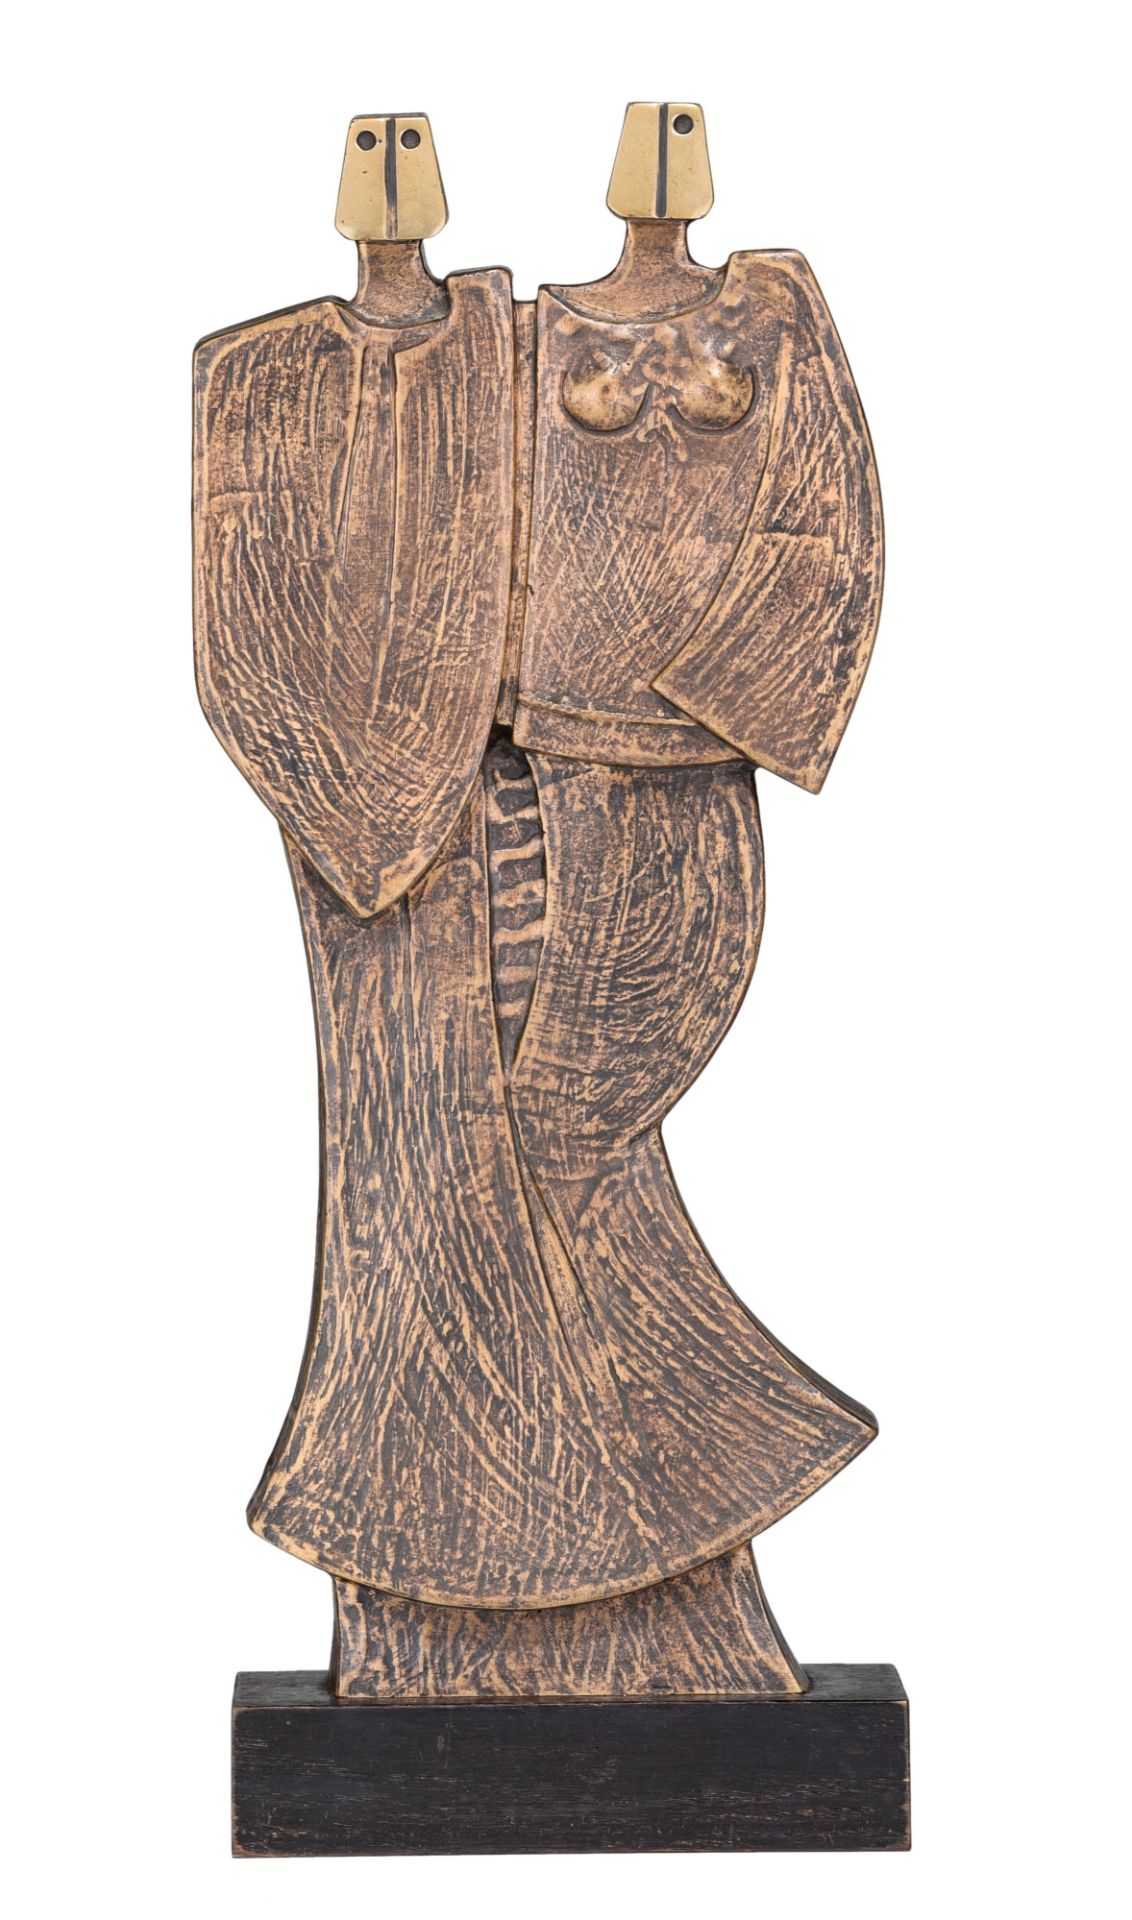 Hubert Minnebo (1940), untitled, N∞ 0/0, patinated bronze on a wooden base, H 40 - 44 cm (without -